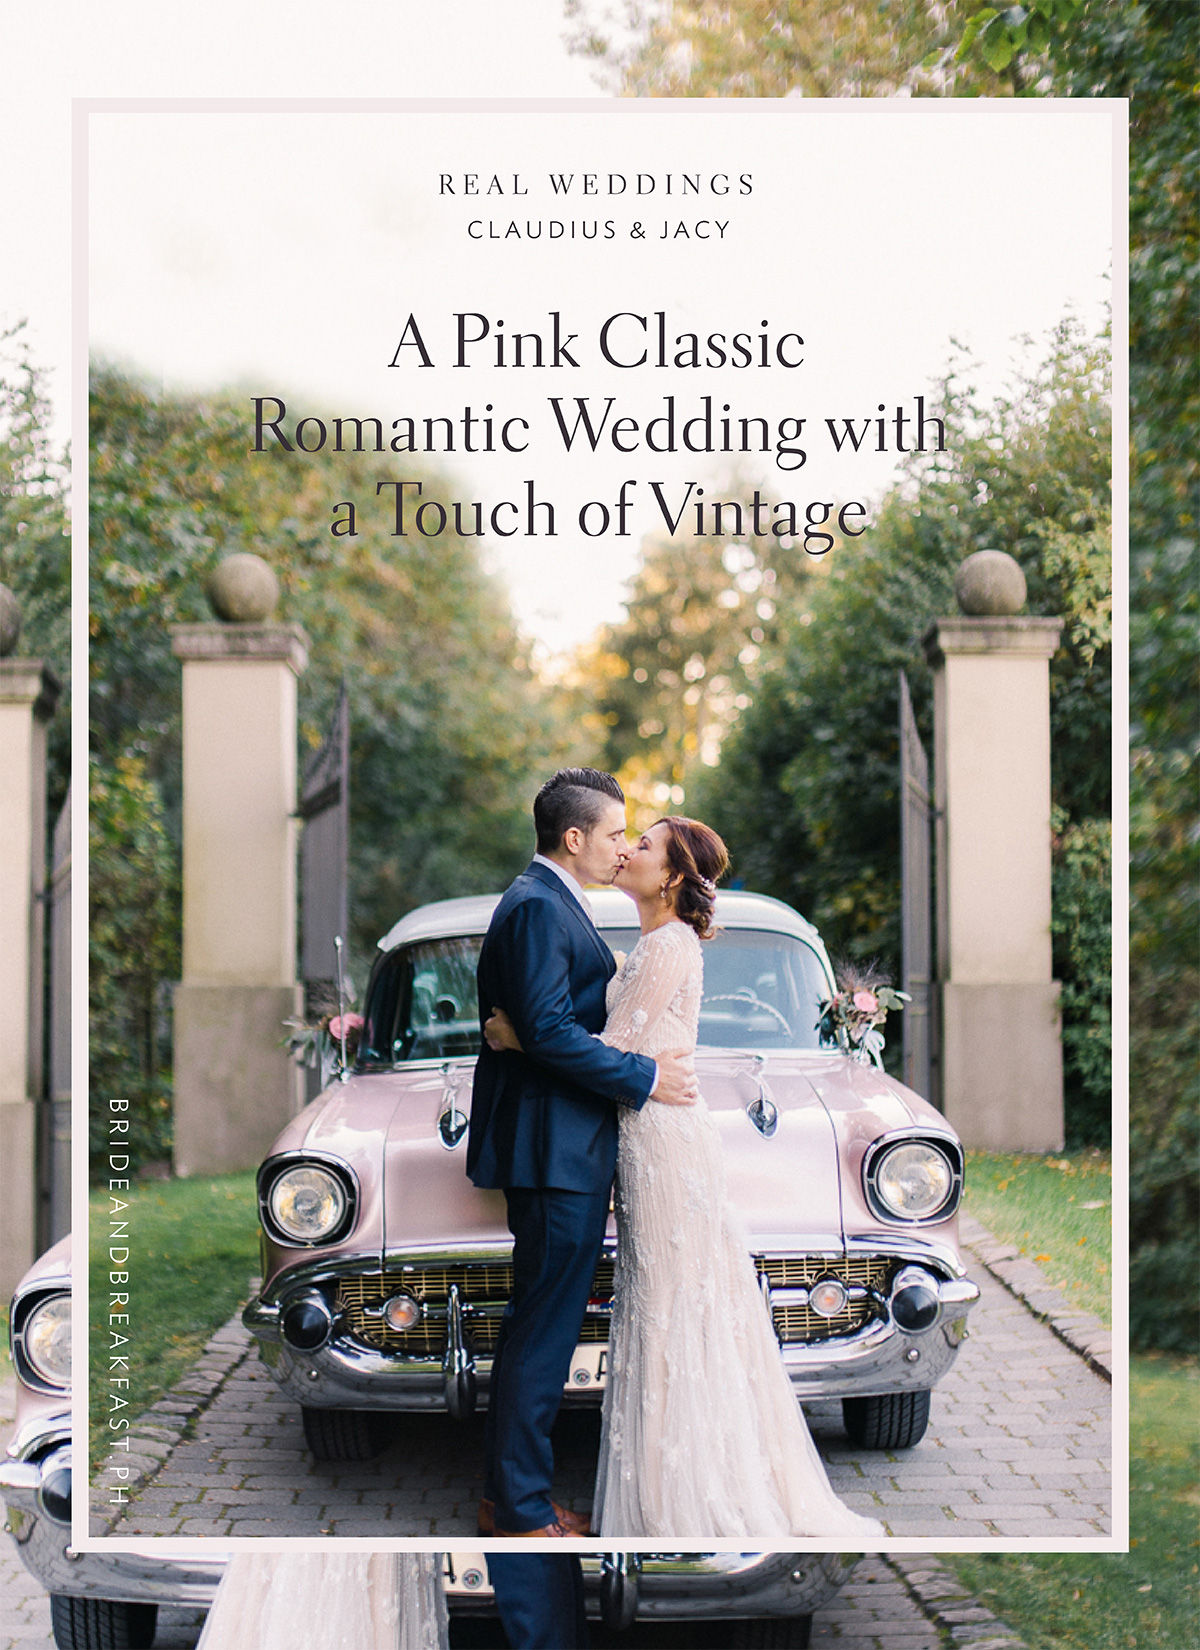 A Pink Classic Romantic Wedding with a Touch of Vintage